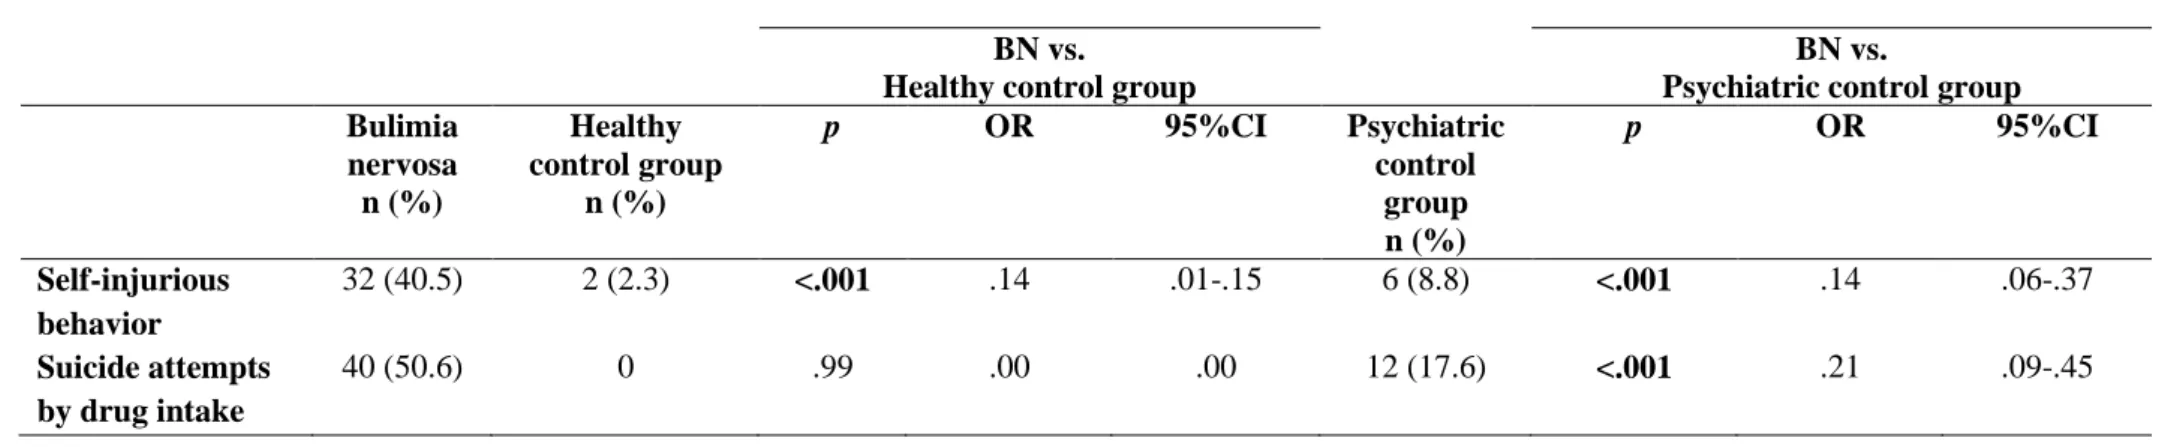 Table 2. Self-injurious behavior and suicide attempts by drug intake in bulimia nervosa and both case control groups   1 